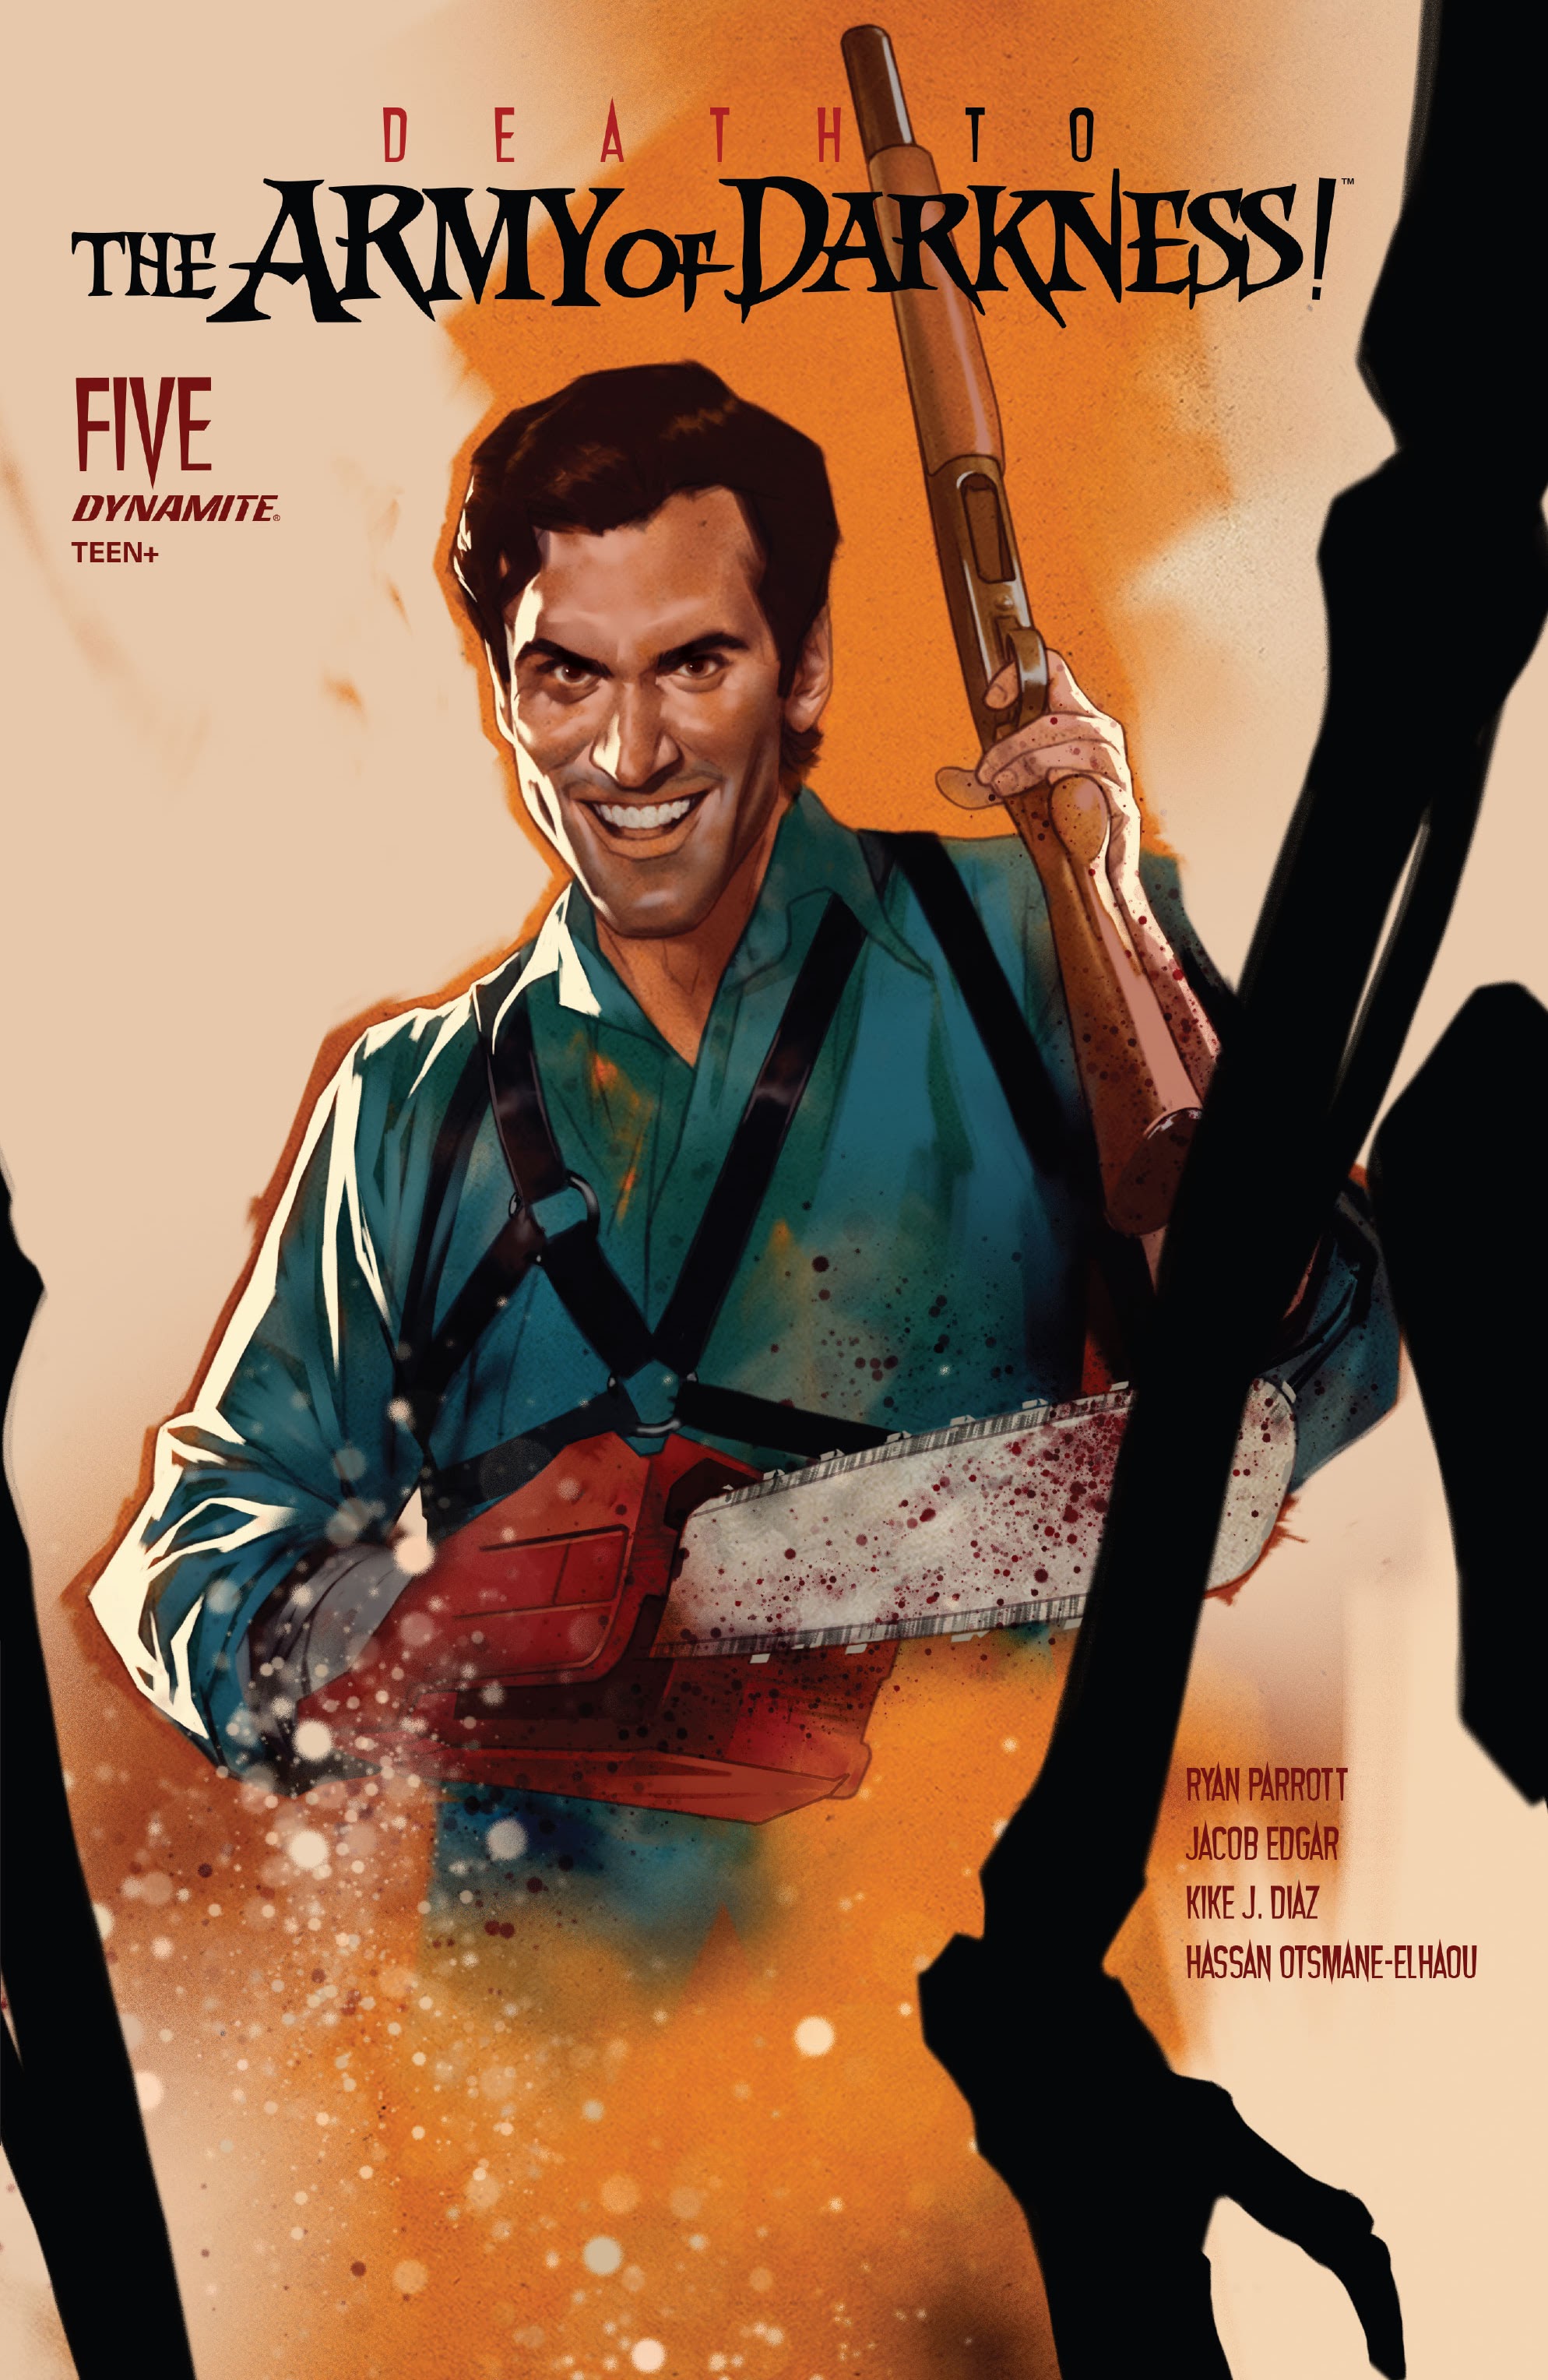 Read online Death To The Army of Darkness comic -  Issue #5 - 1